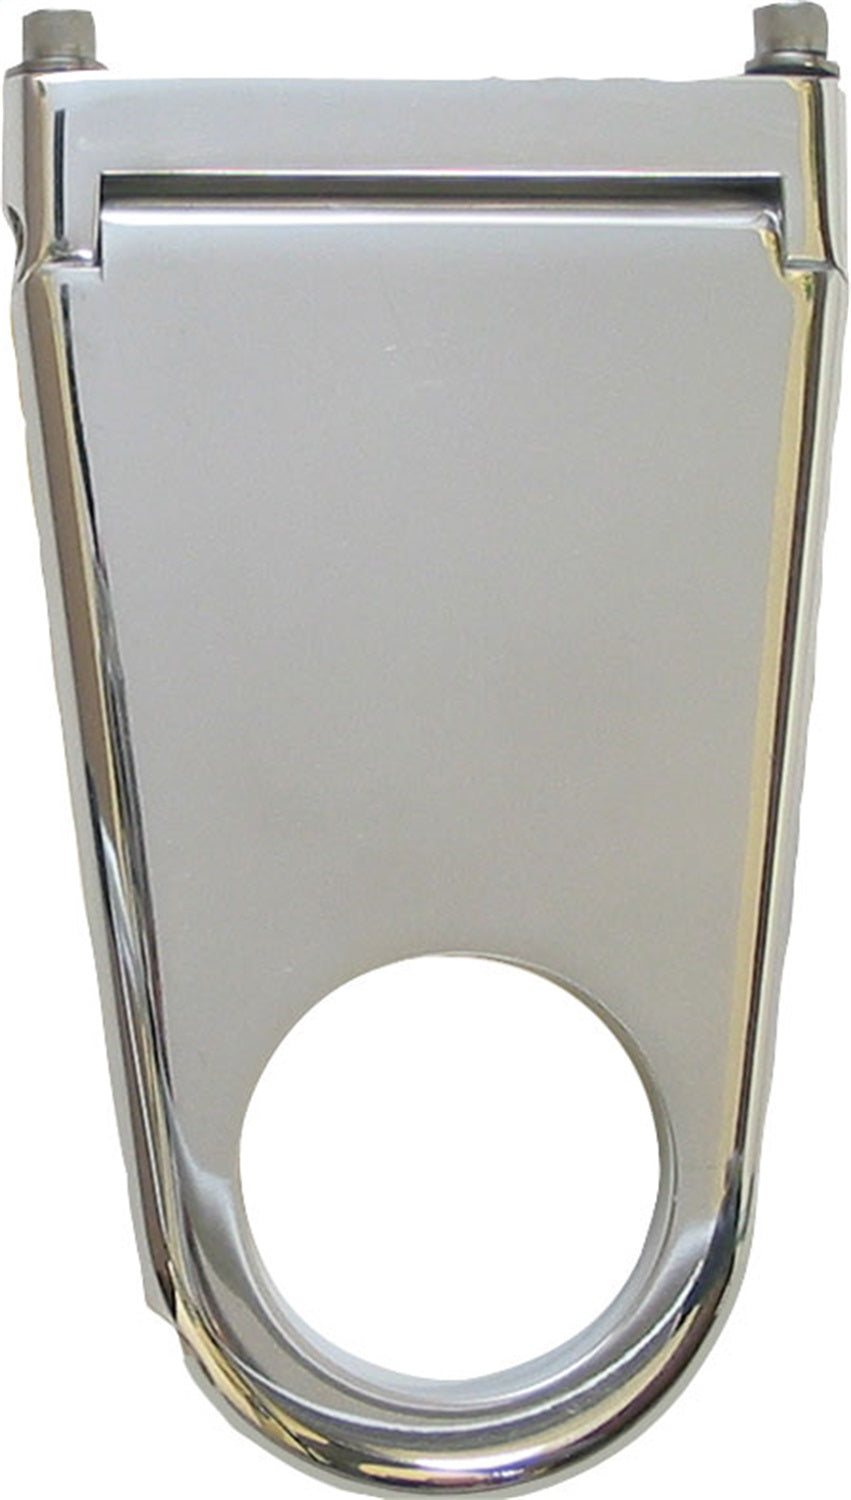 Borgeson Column Drop Blank Style 2-3/8in. Column X 4in. Drop Polished Aluminum 911234